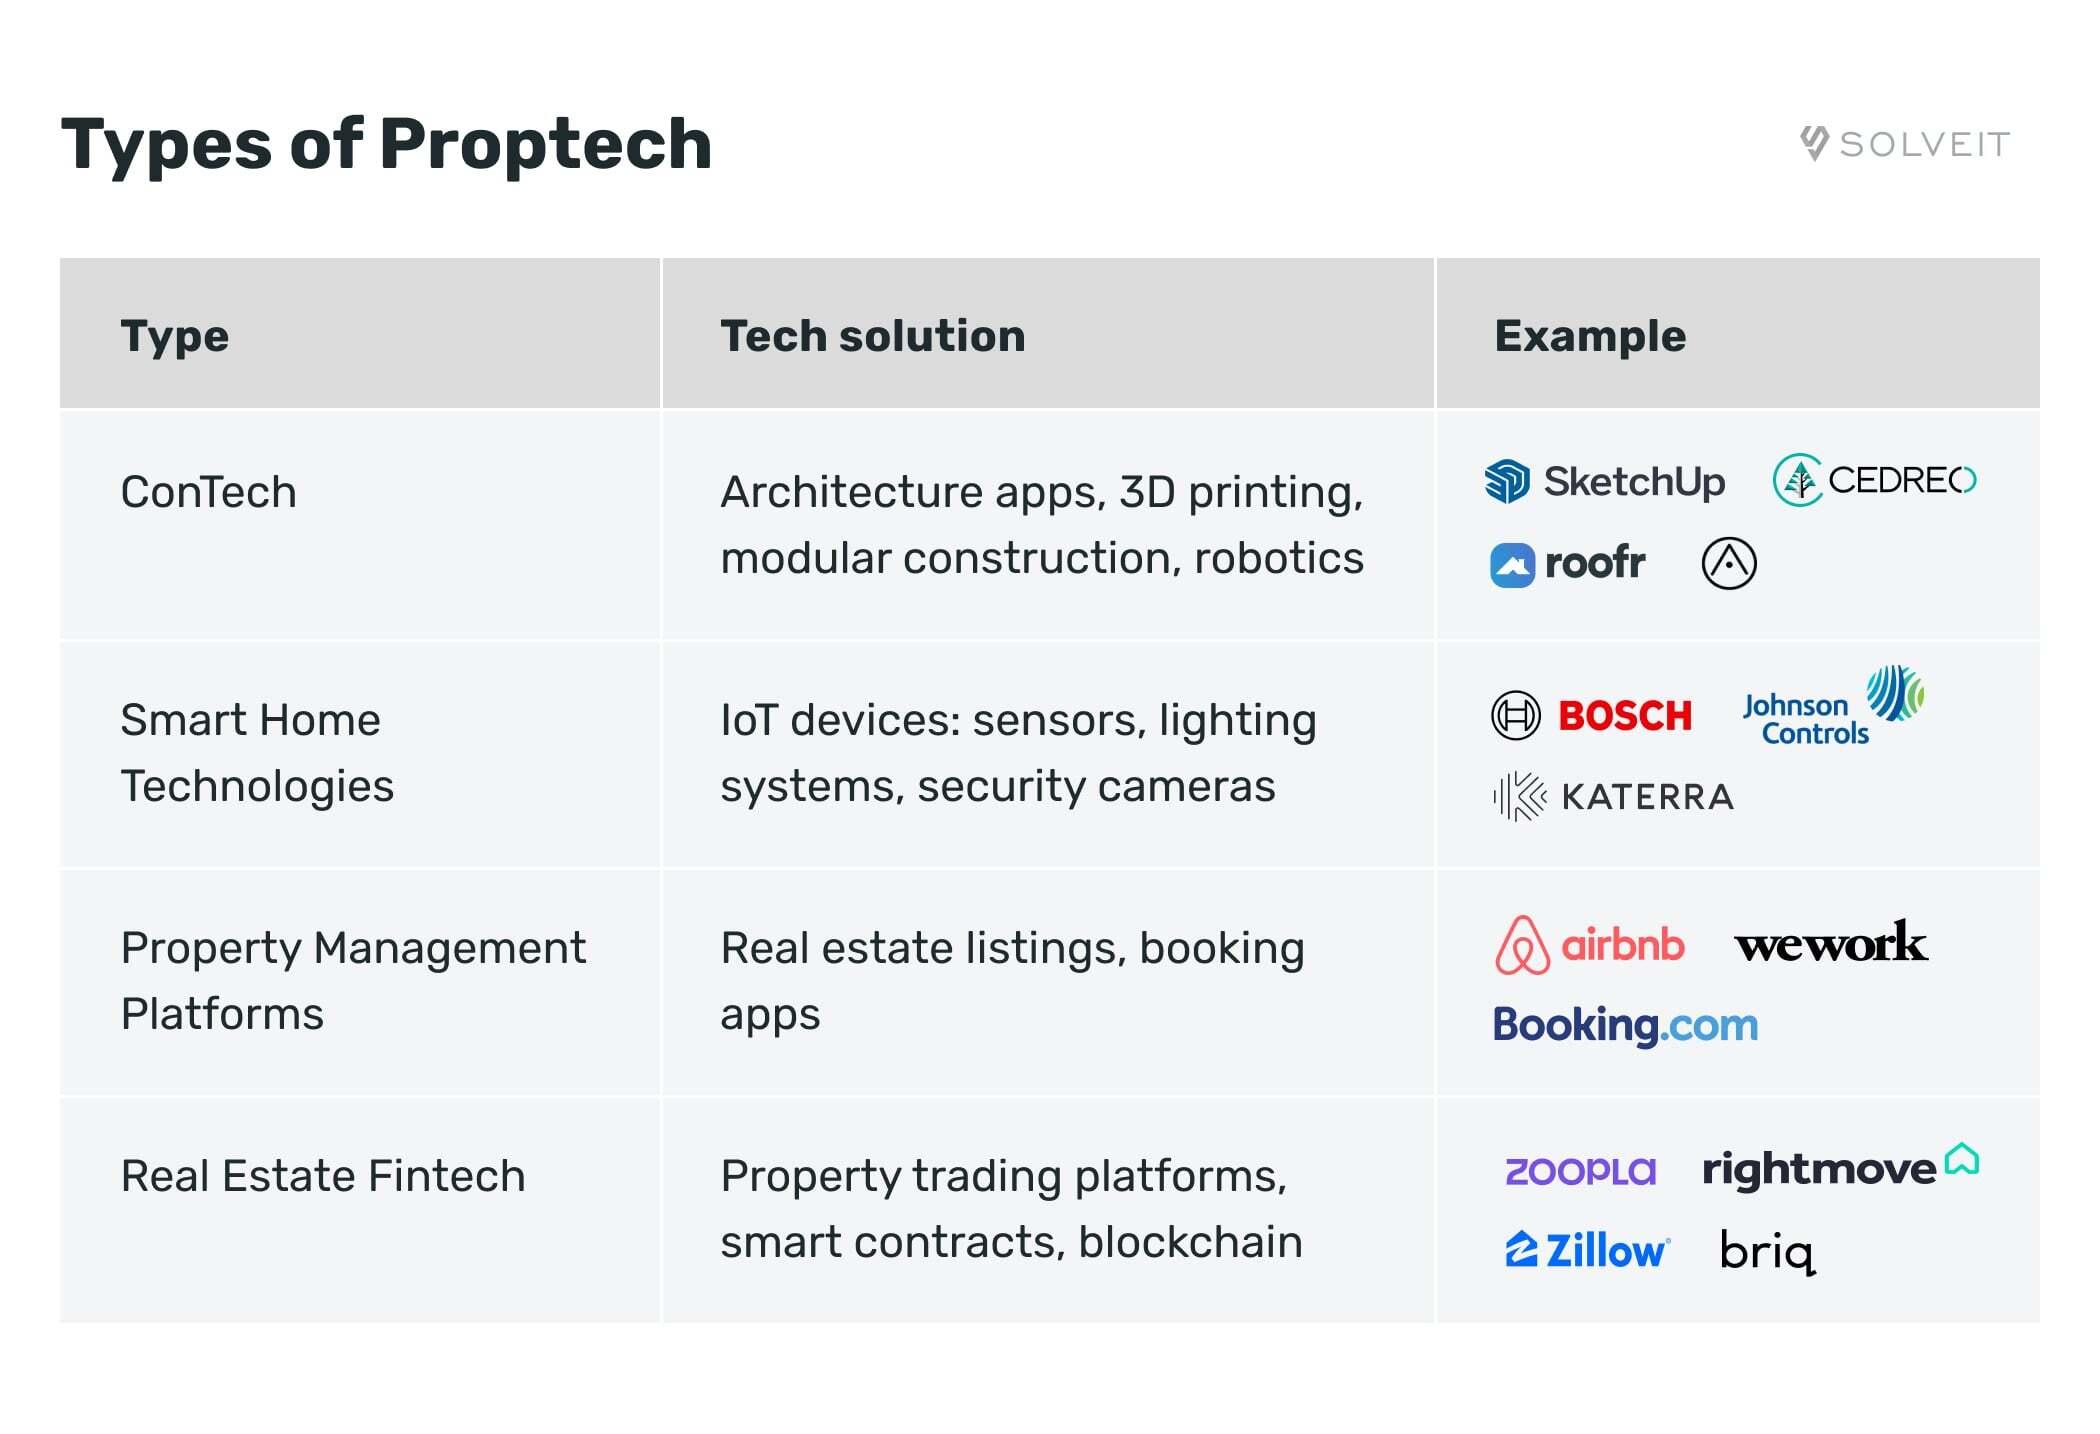 Types of proptech: solutions and examples